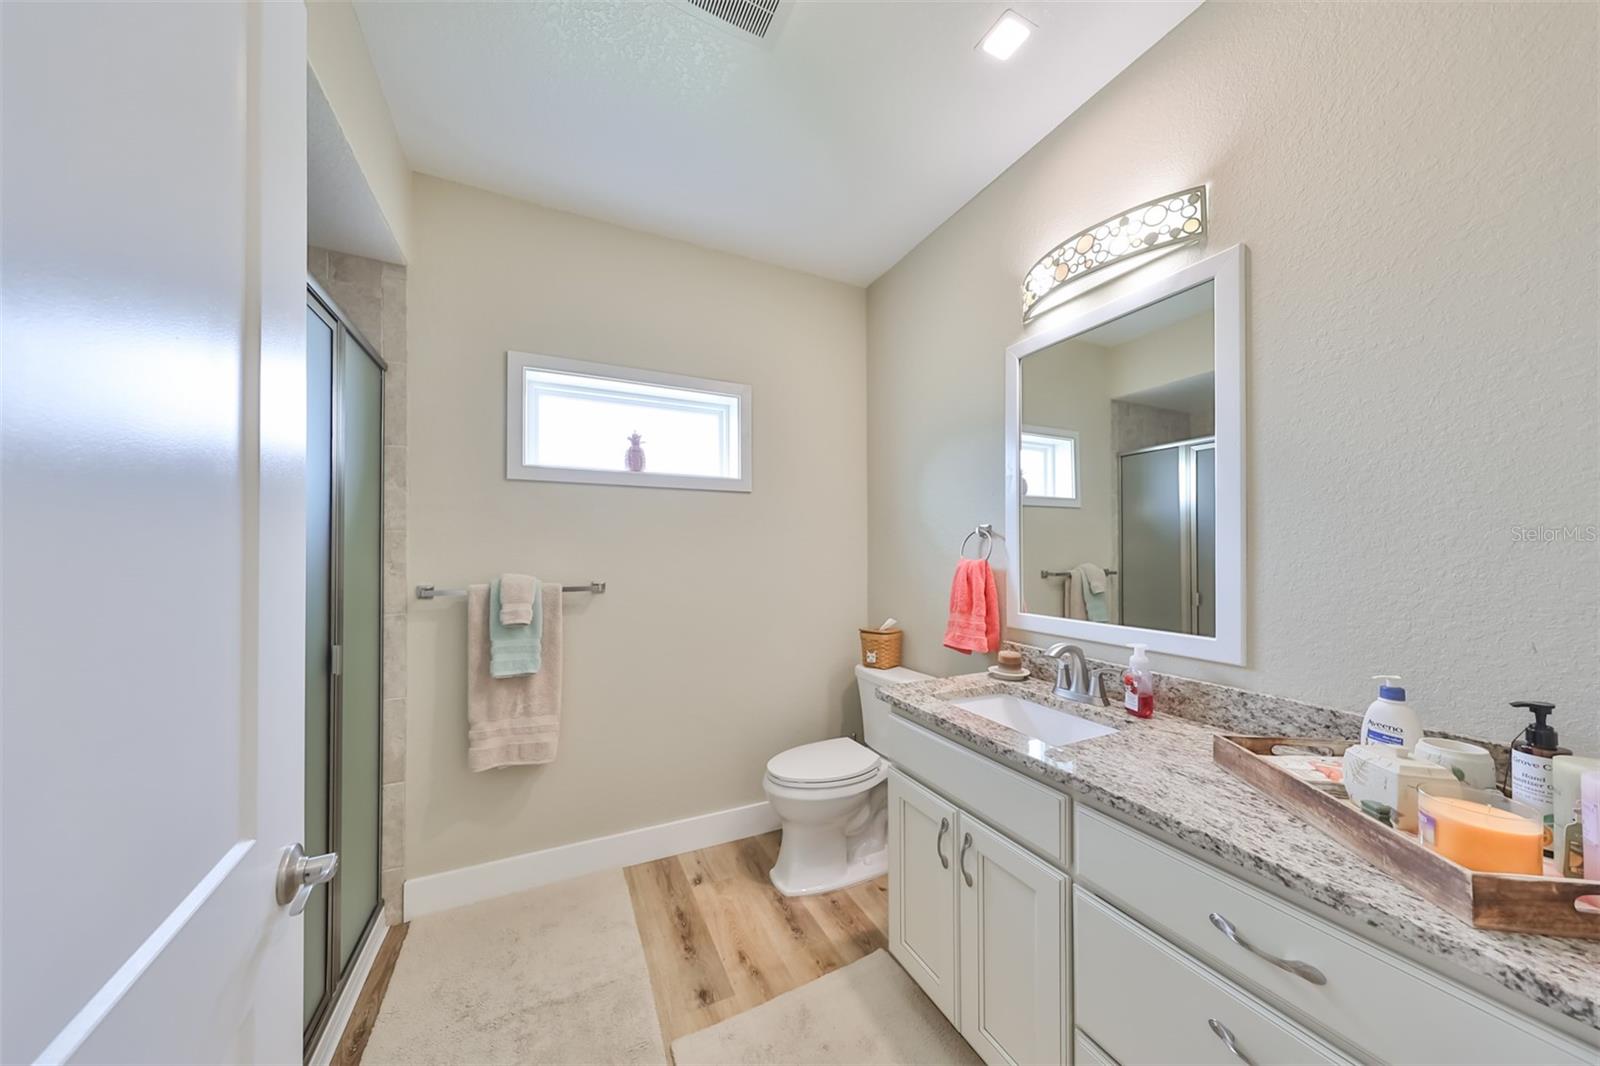 The guest bathroom includes recessed lighting, granite counters, matched flooring as throughout the home, and a walk in shower.